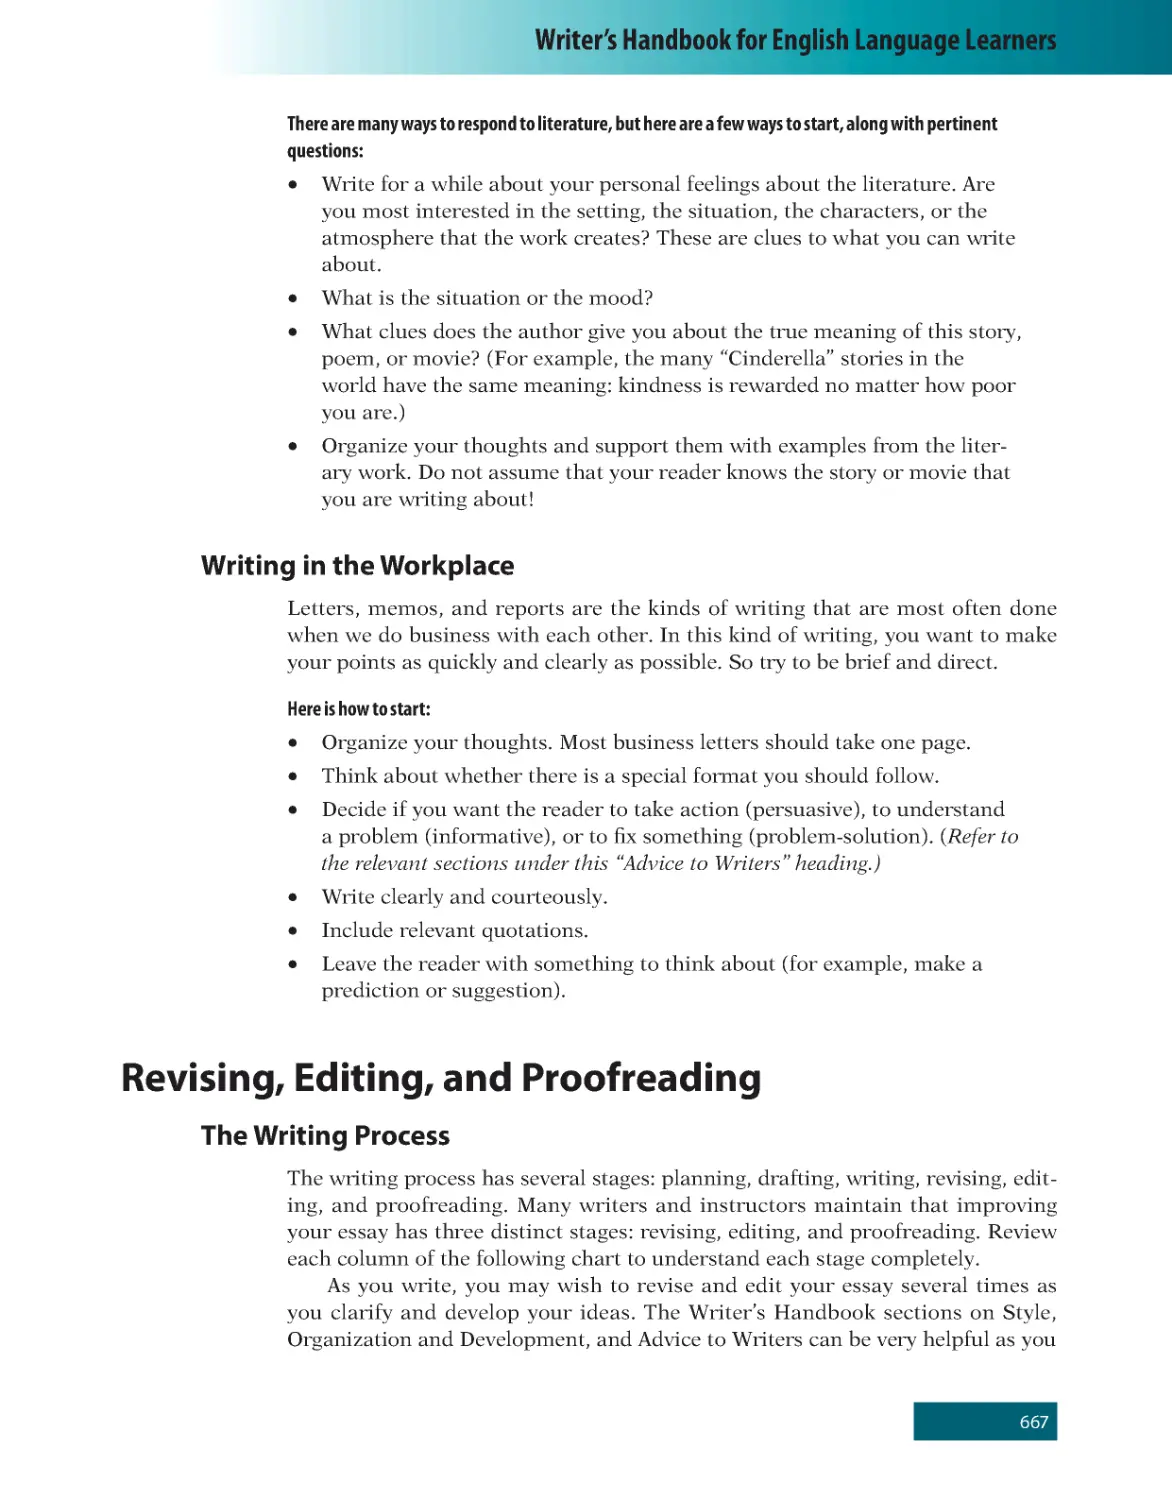 Writing in the Workplace
Revising, Editing, and Proofreading